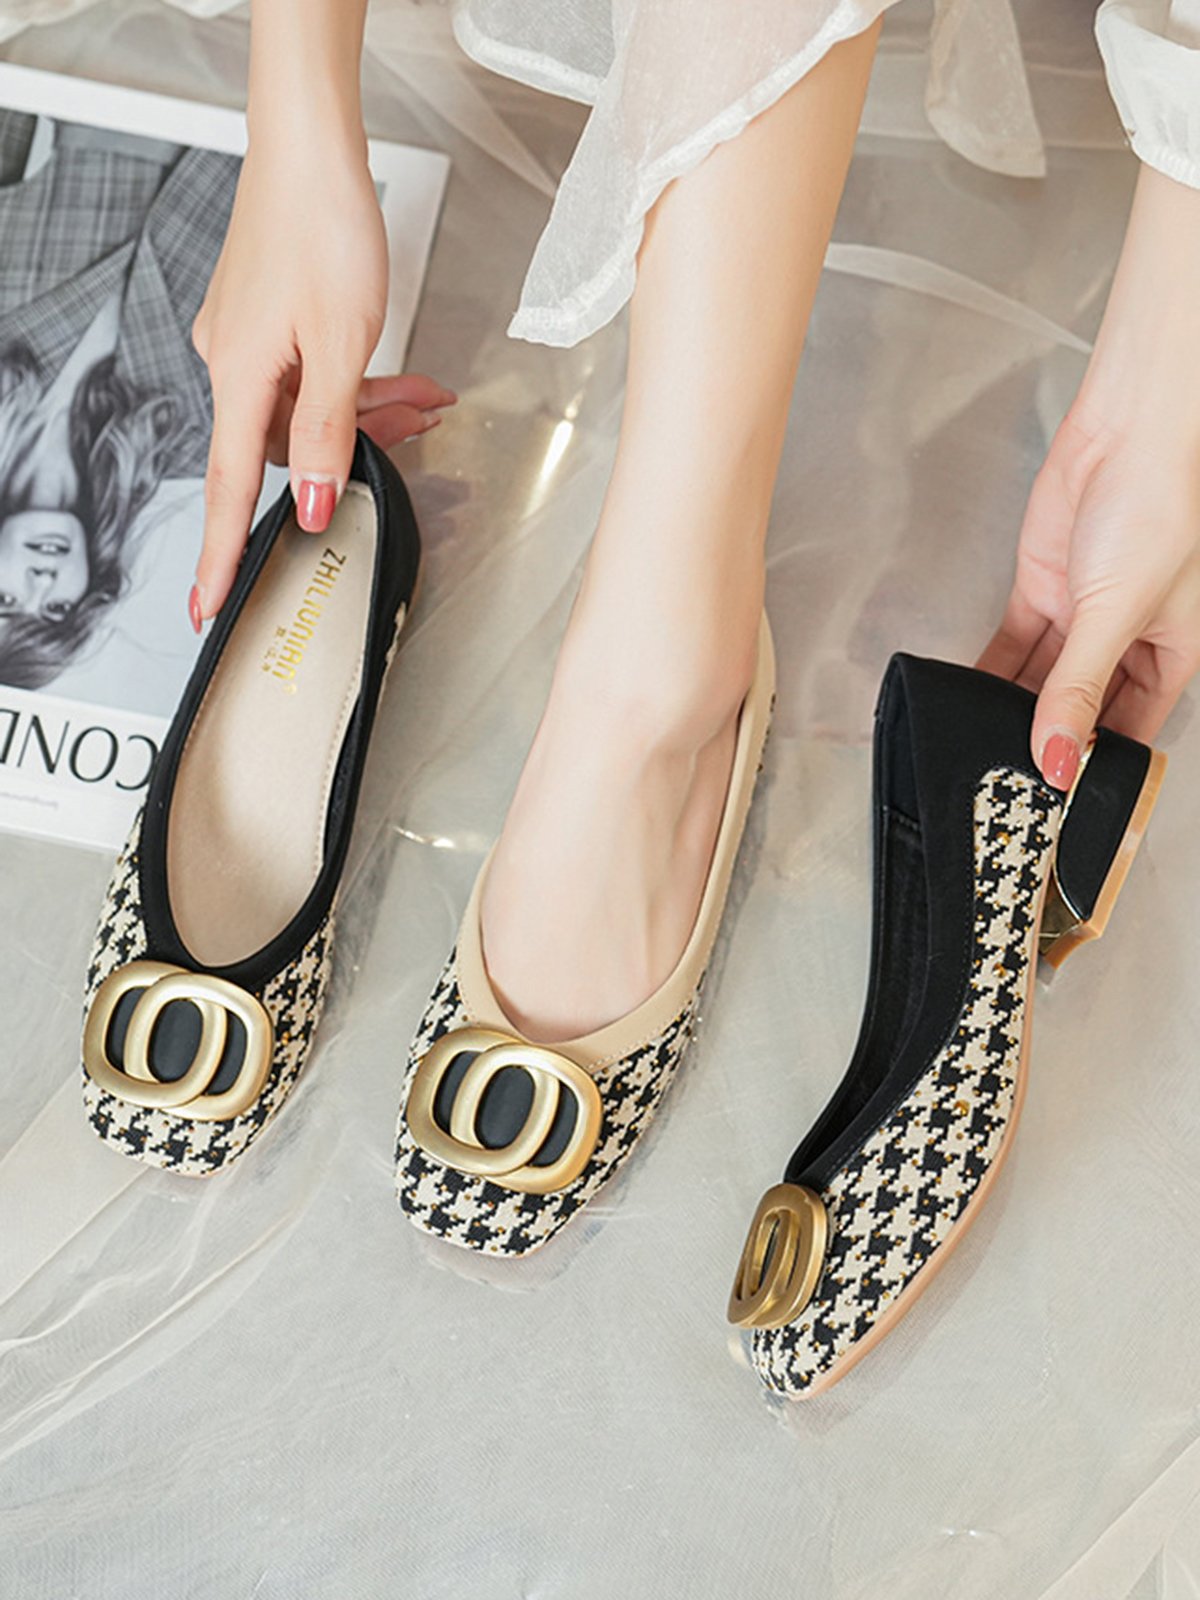 Elegant Metal Decor Houndstooth Square Toe Low Heel Shallow Shoes